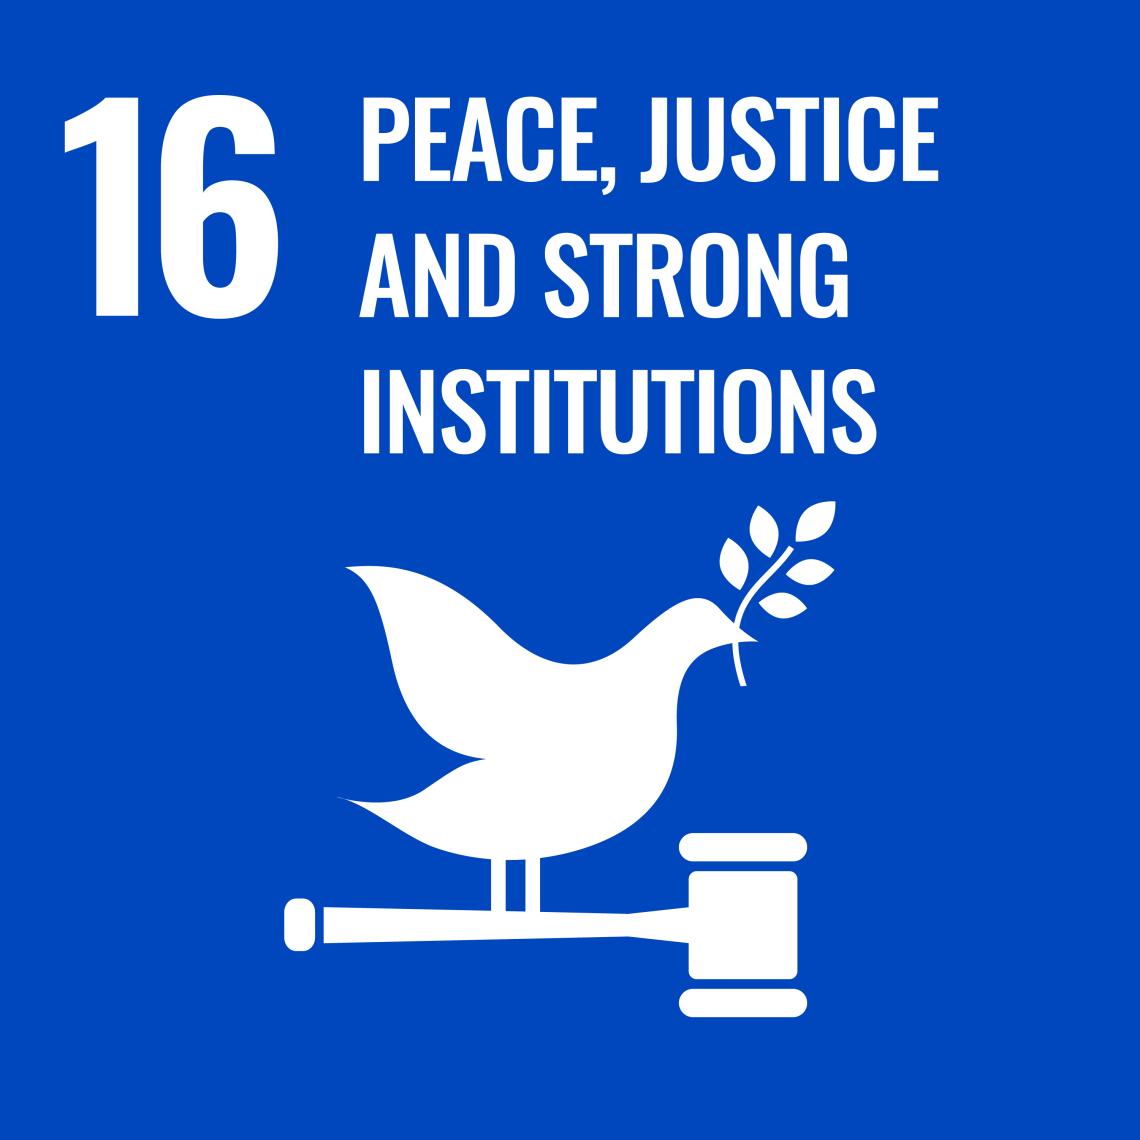 16. Peace, Justice and Strong Institutions